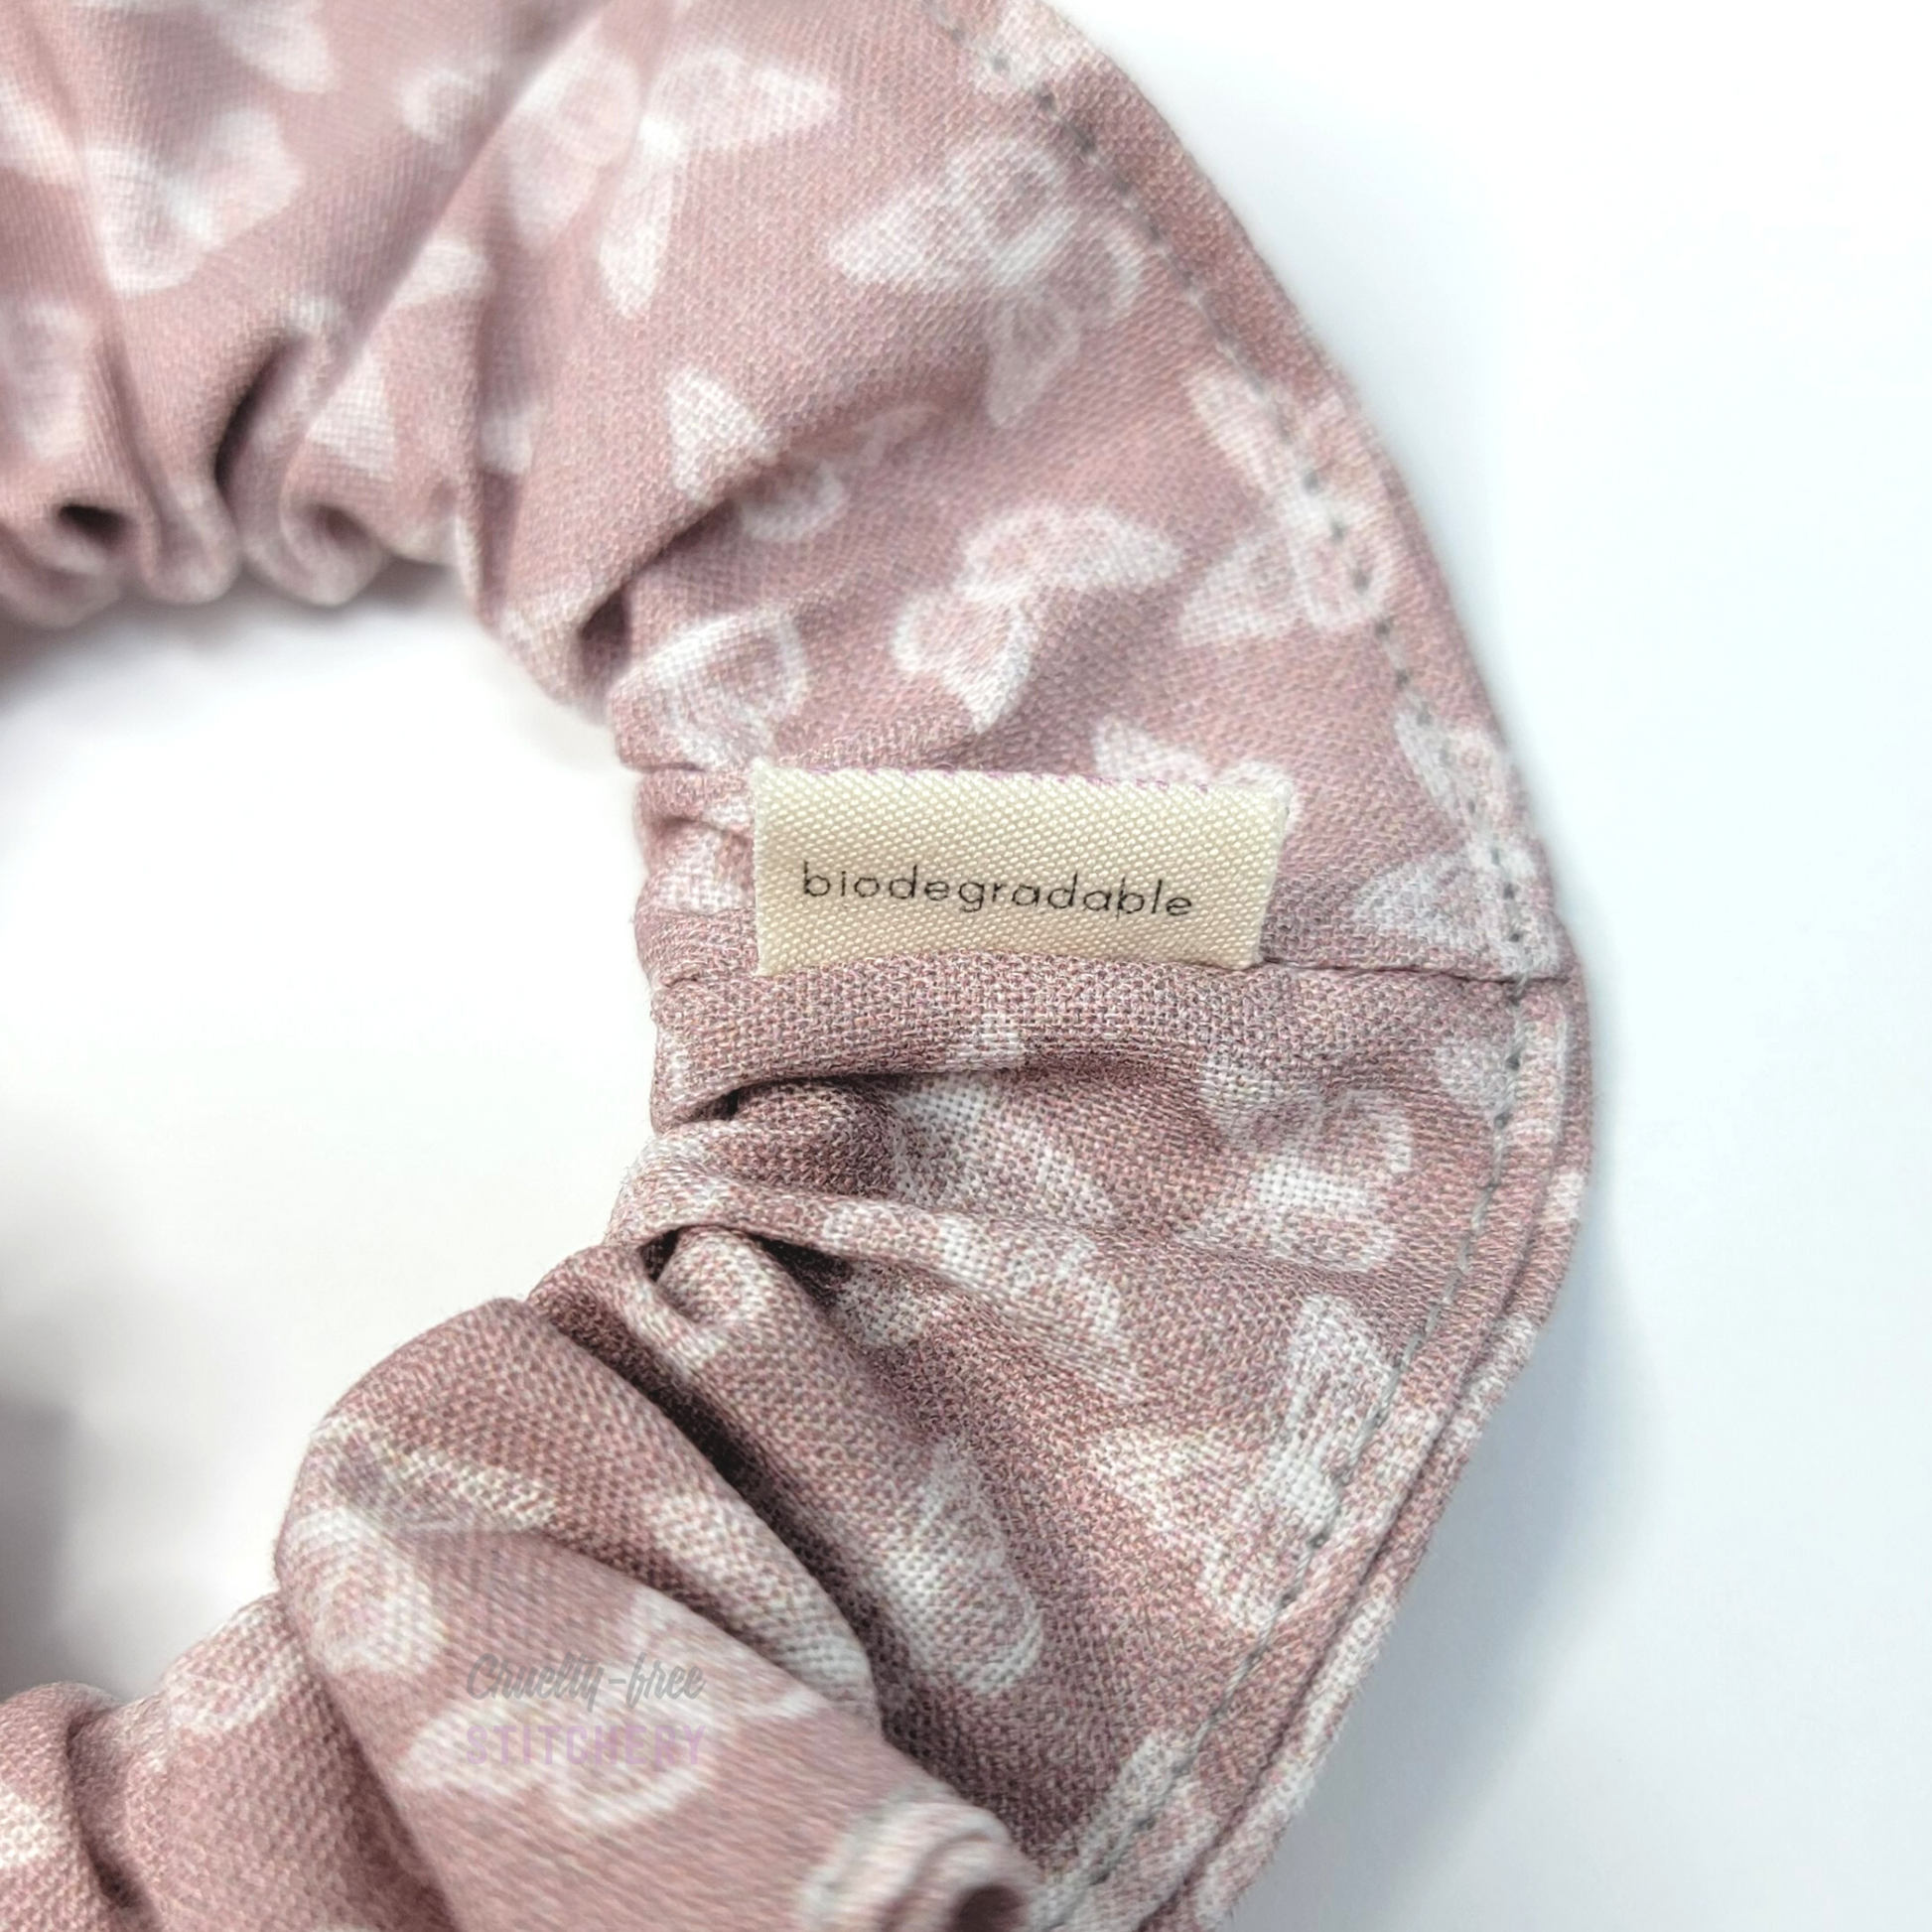 Muted mauve pink scrunchie with tiny white butterflies, The back of the small white tag says "biodegradable"